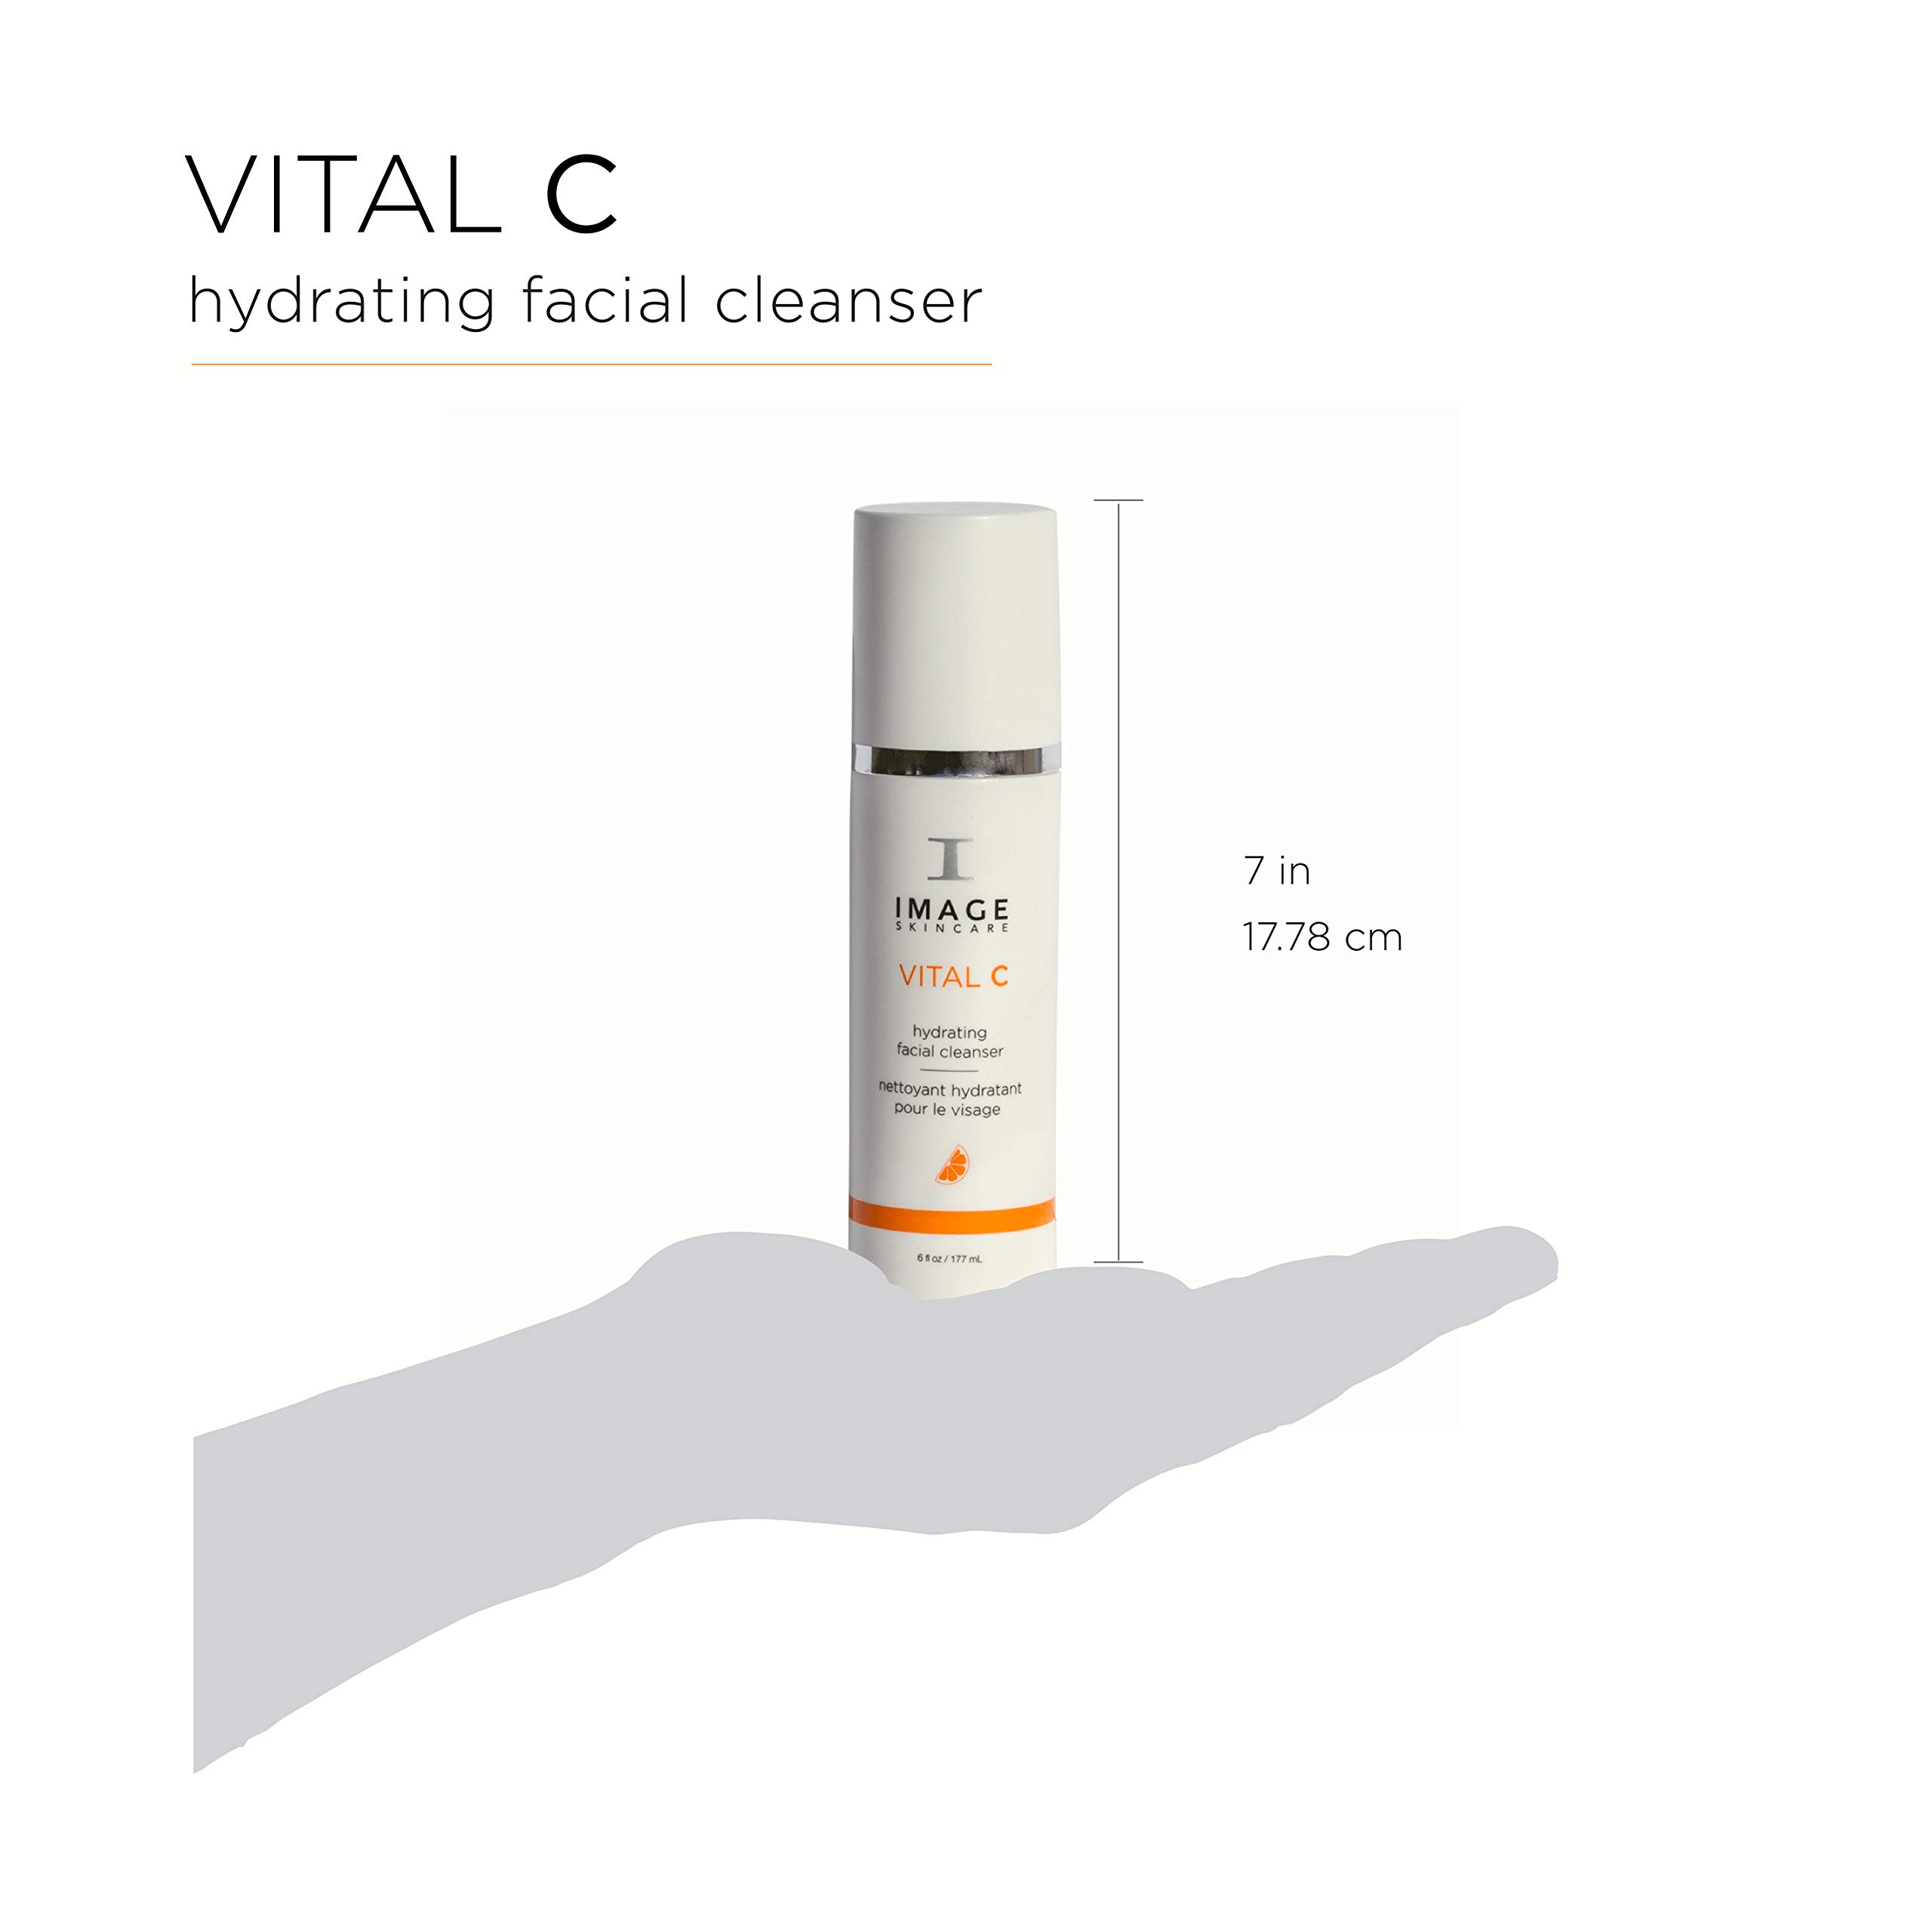 IMAGE Skincare, VITAL C Hydrating Facial Cleanser, Gentle Face Wash with Vitamin C, E and A, 6 fl oz